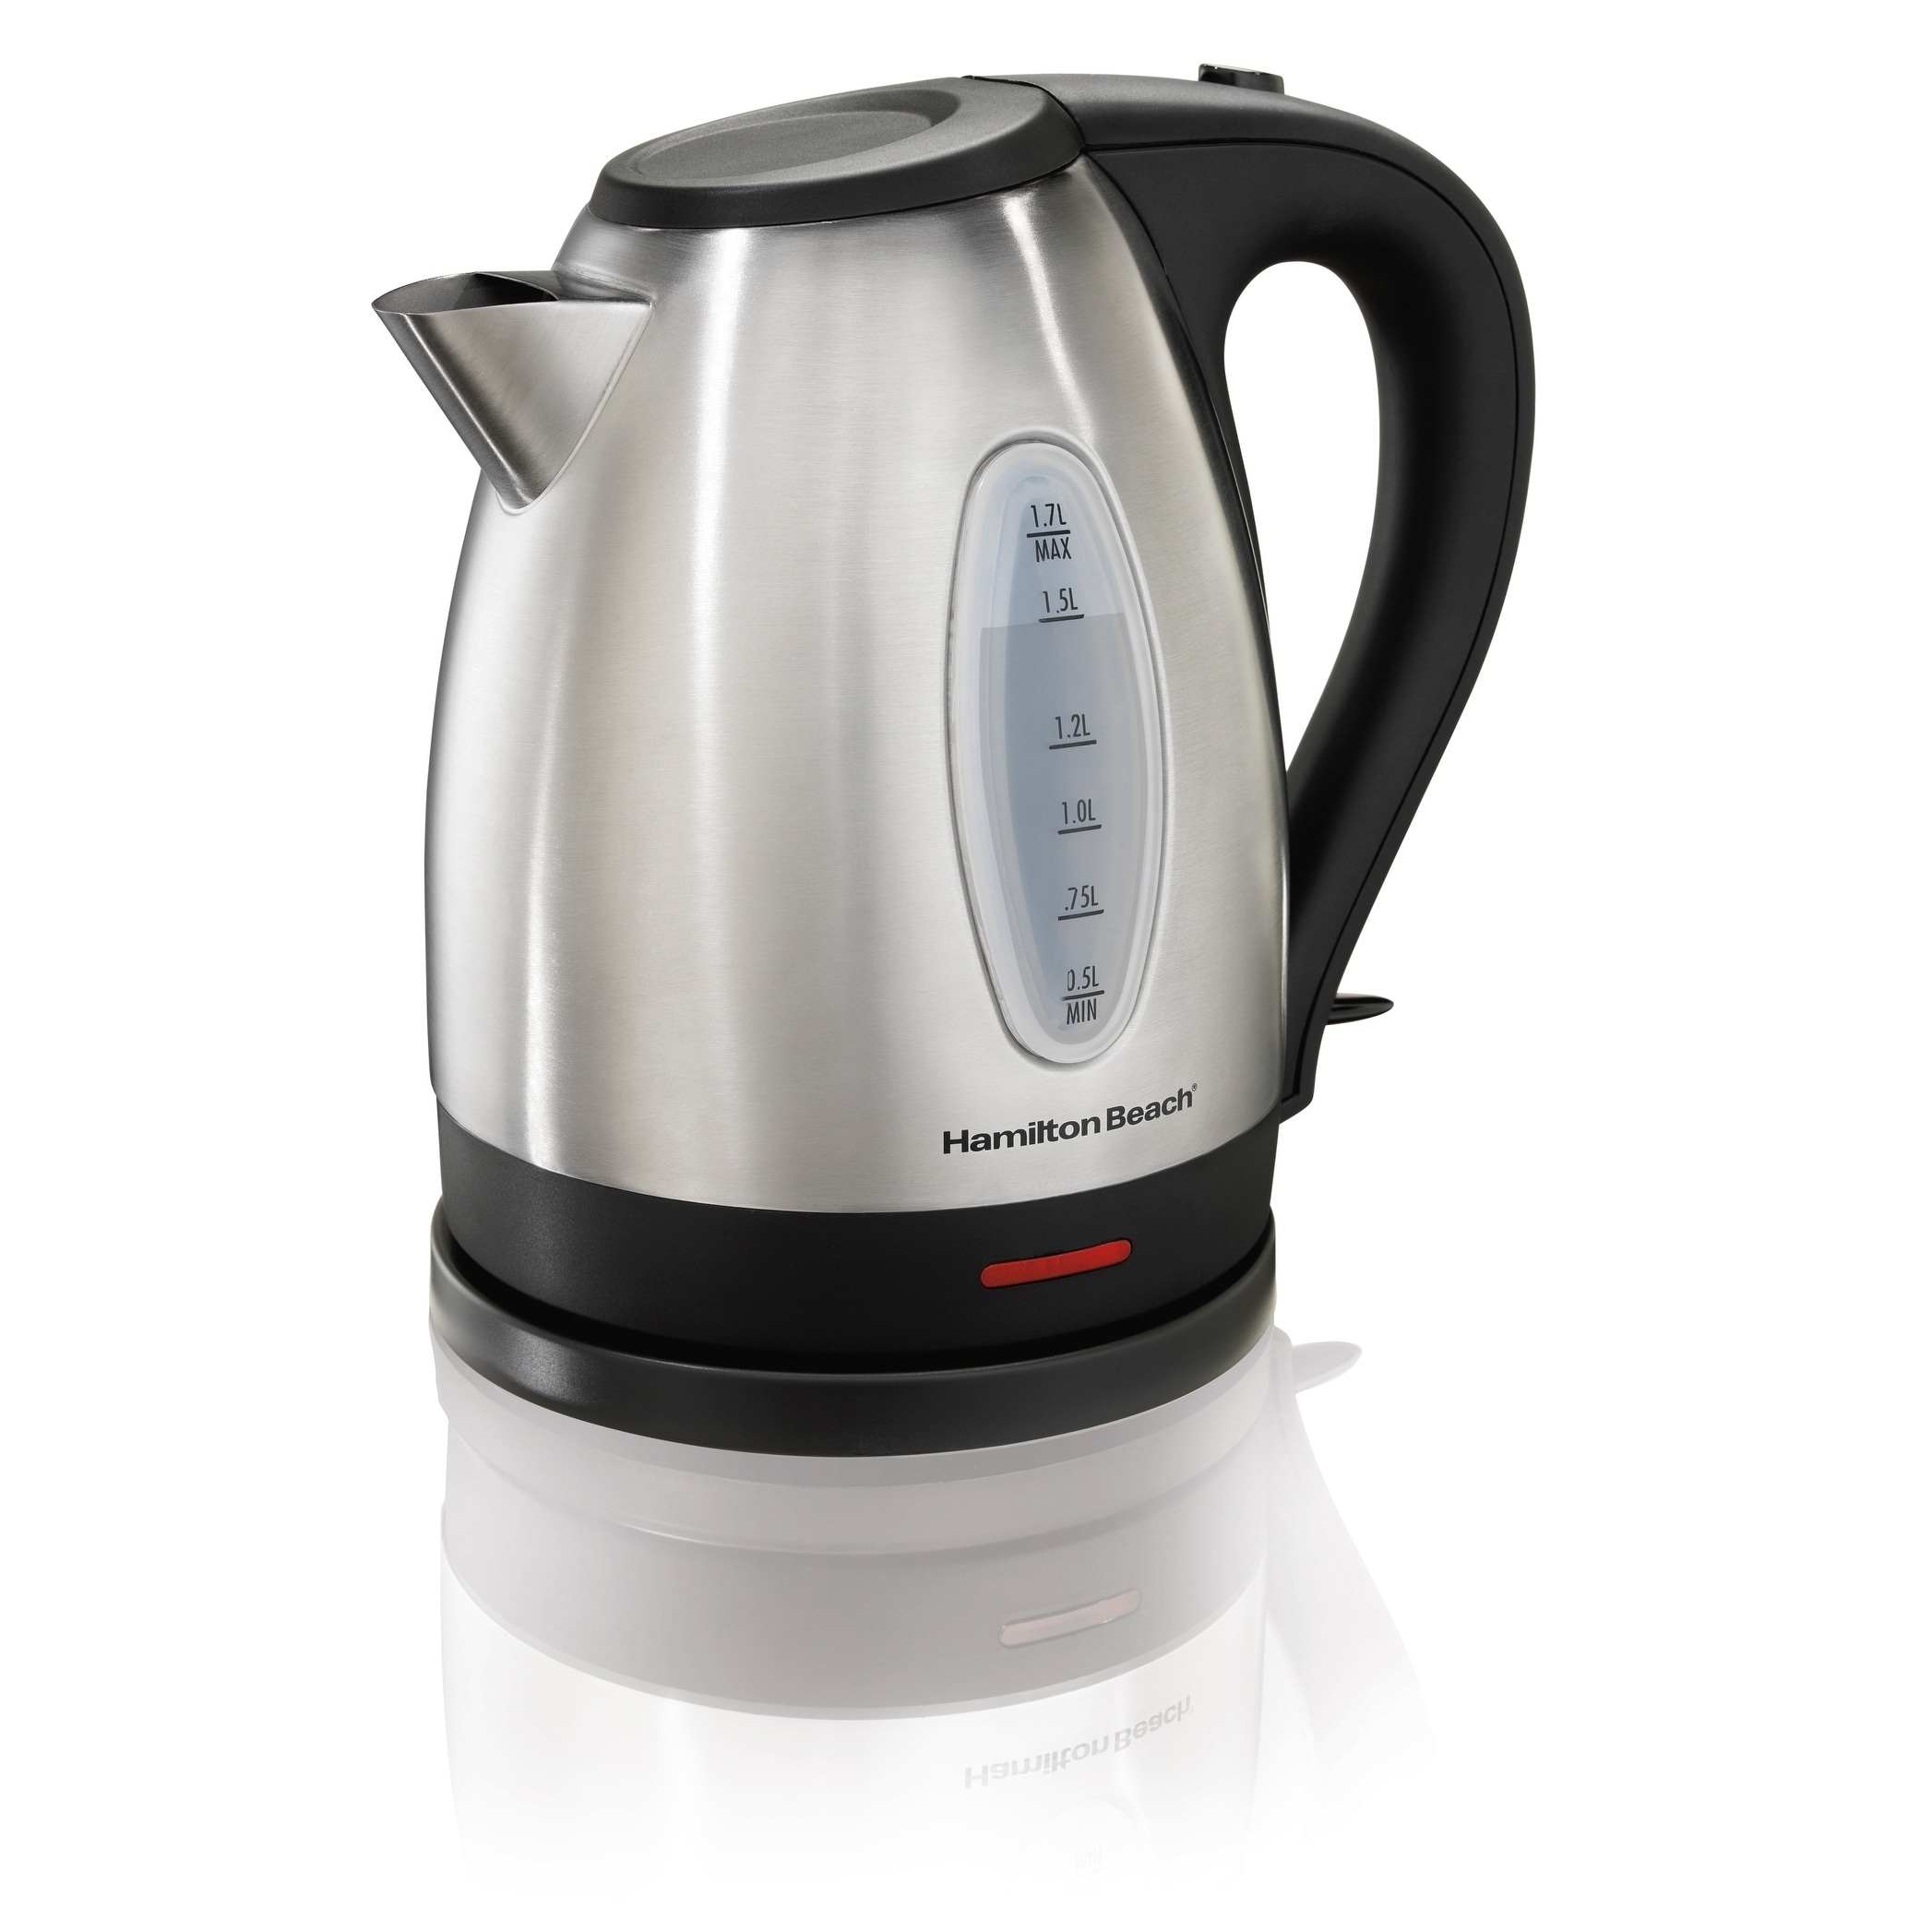 COMMERCIAL CHEF 1.7L Cordless Stainless Steel Kettle